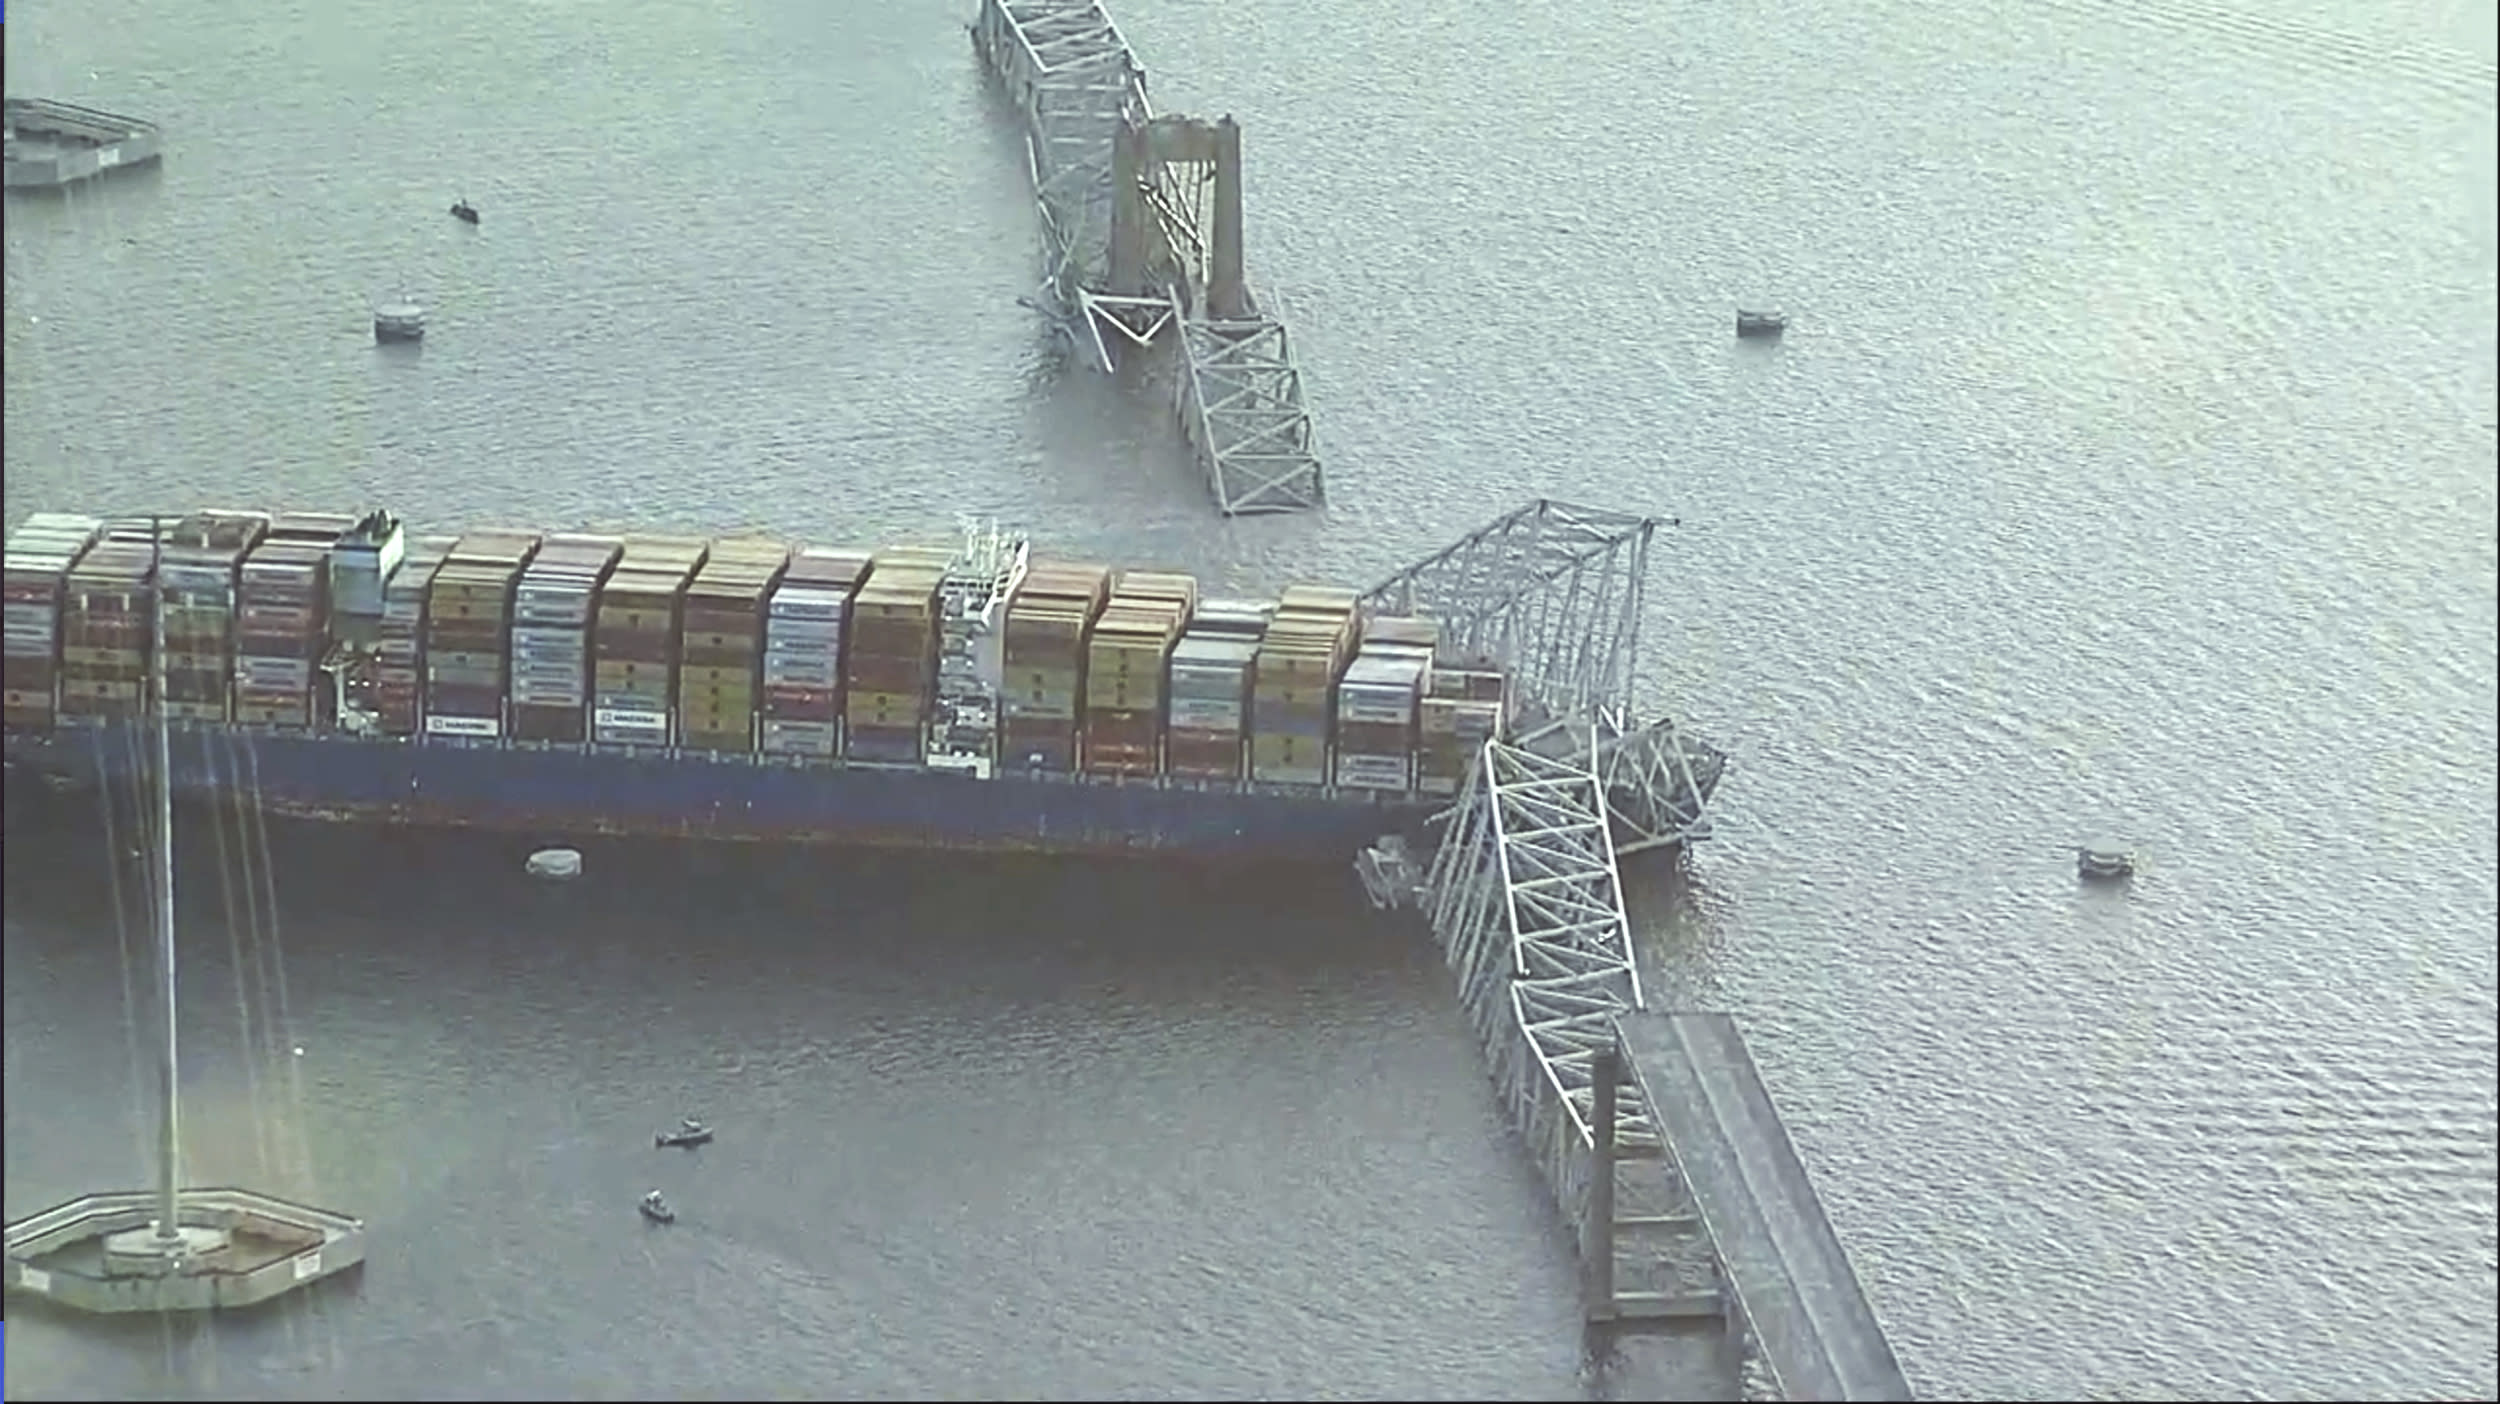 Container ship amid destroyed bridge, viewed from above.